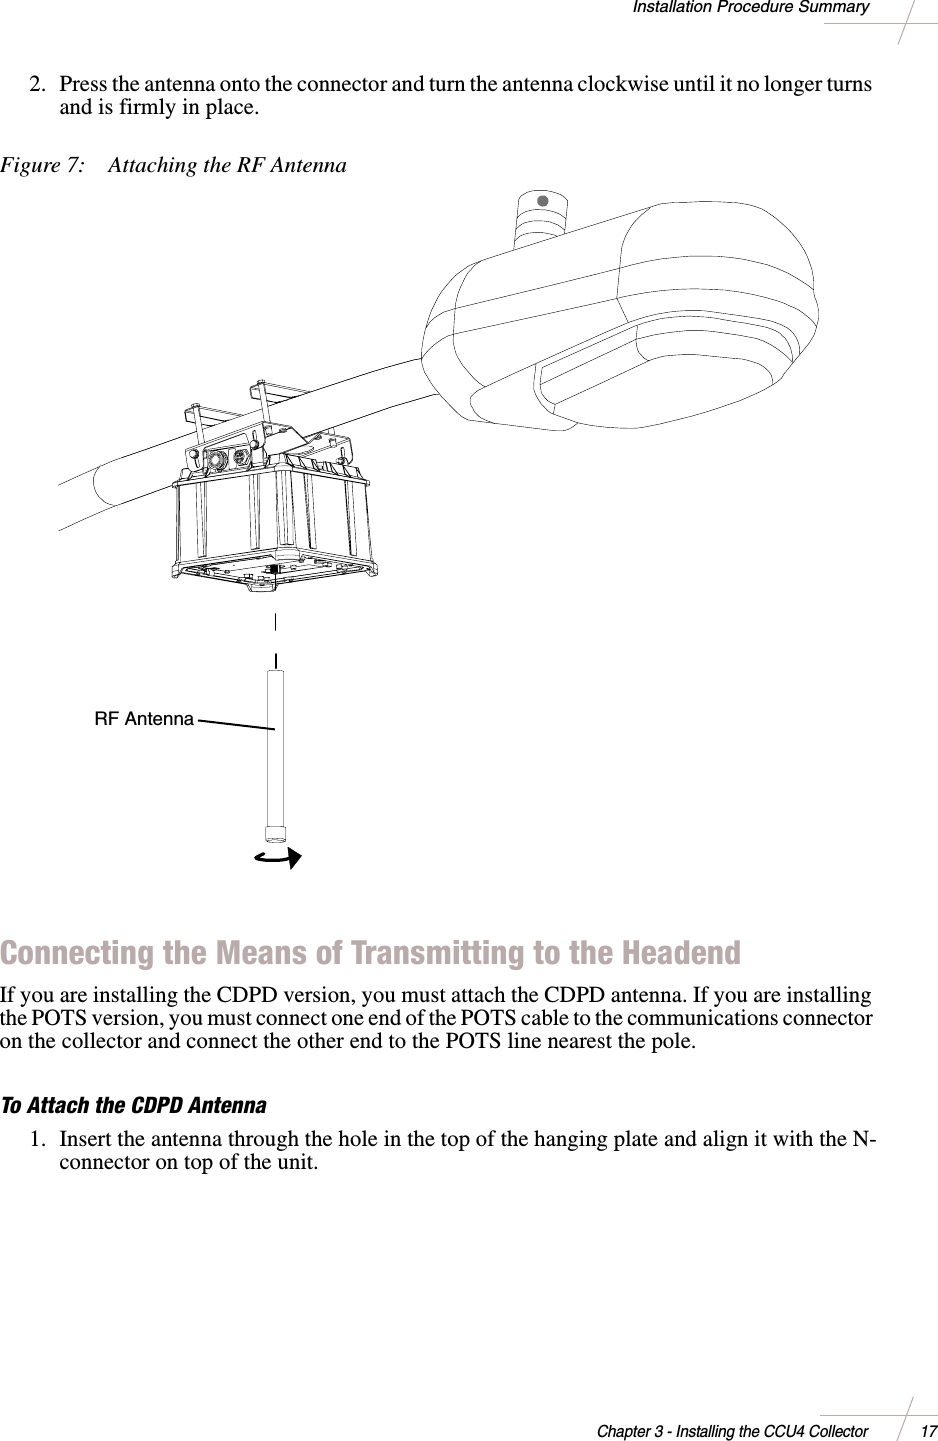 DRAFTChapter 3 - Installing the CCU4 Collector 17Installation Procedure Summary2. Press the antenna onto the connector and turn the antenna clockwise until it no longer turnsandisfirmlyinplace.Figure 7: Attaching the RF AntennaConnecting the Means of Transmitting to the HeadendIf you are installing the CDPD version, you must attach the CDPD antenna. If you are installingthe POTS version, you must connect one end of the POTS cable to the communications connectoron the collector and connect the other end to the POTS line nearest the pole.To Attach the CDPD Antenna1. Insert the antenna through the hole in the top of the hanging plate and align it with the N-connector on top of the unit.RF Antenna